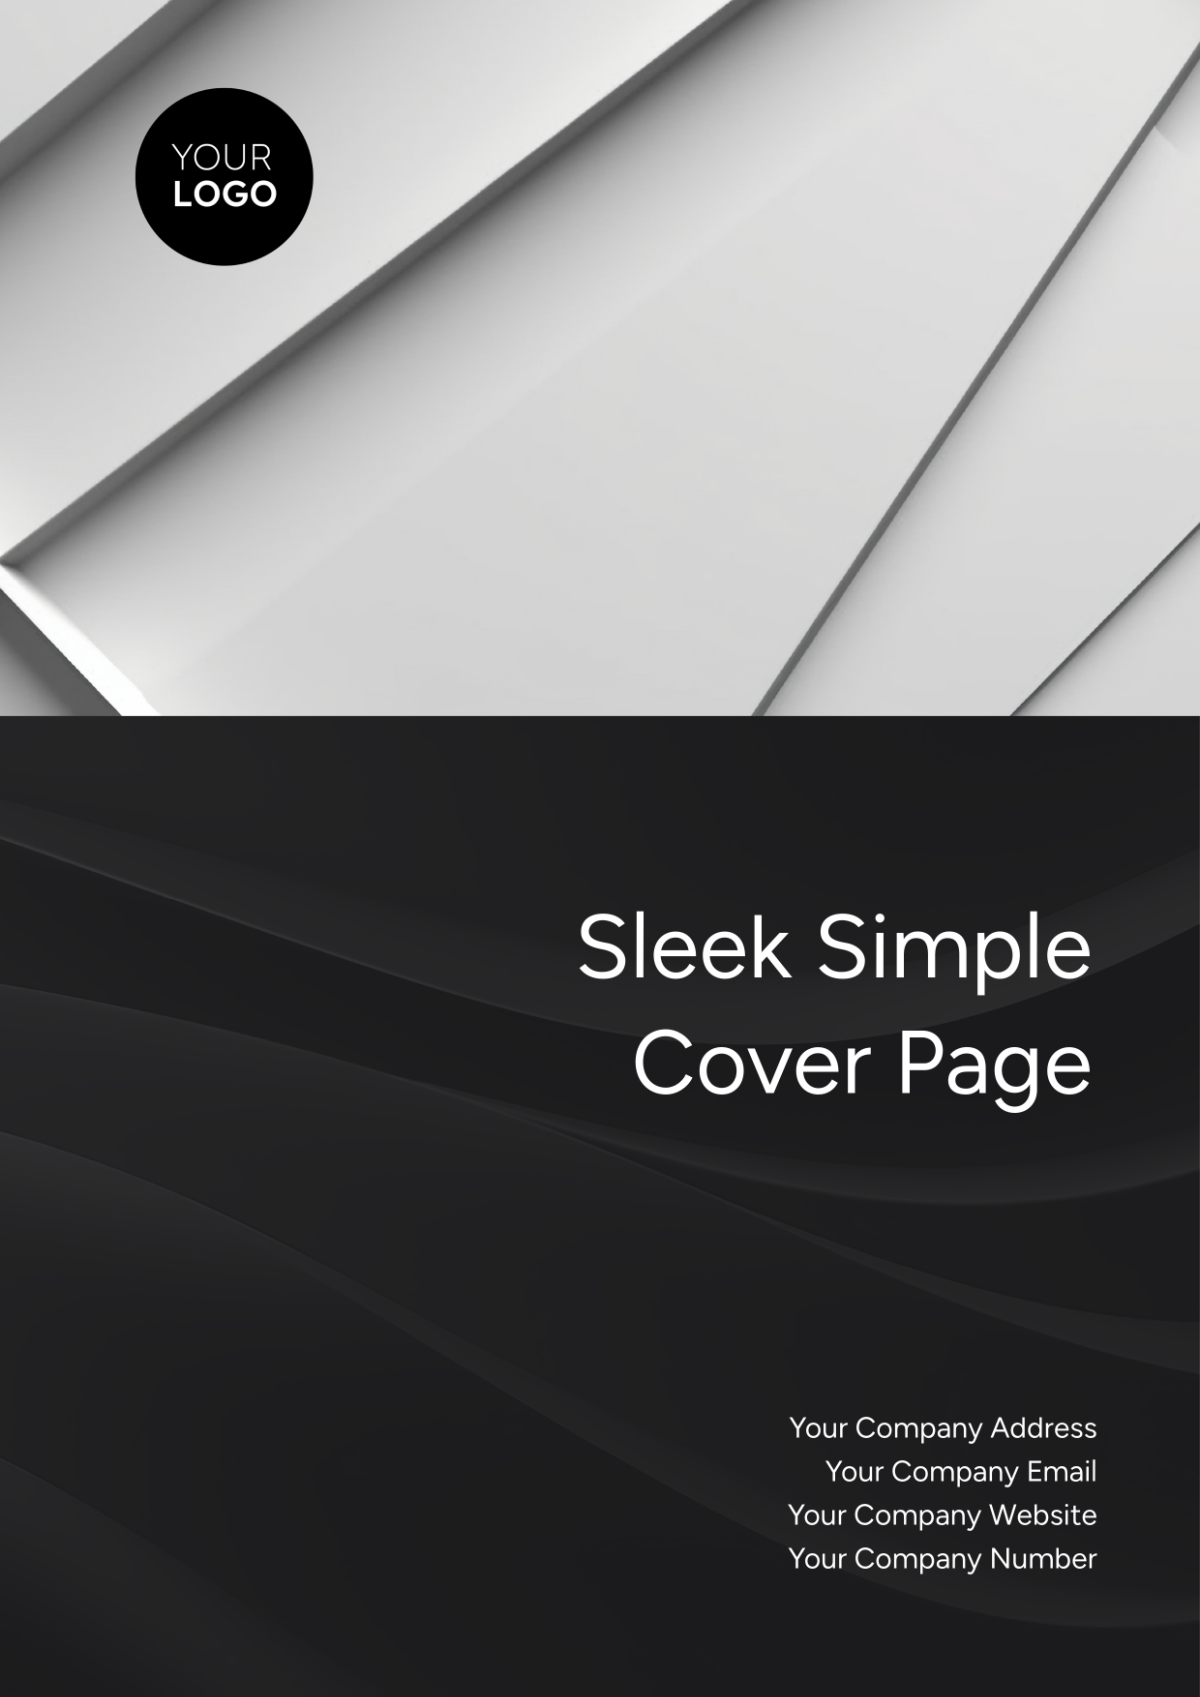 Sleek Simple Cover Page